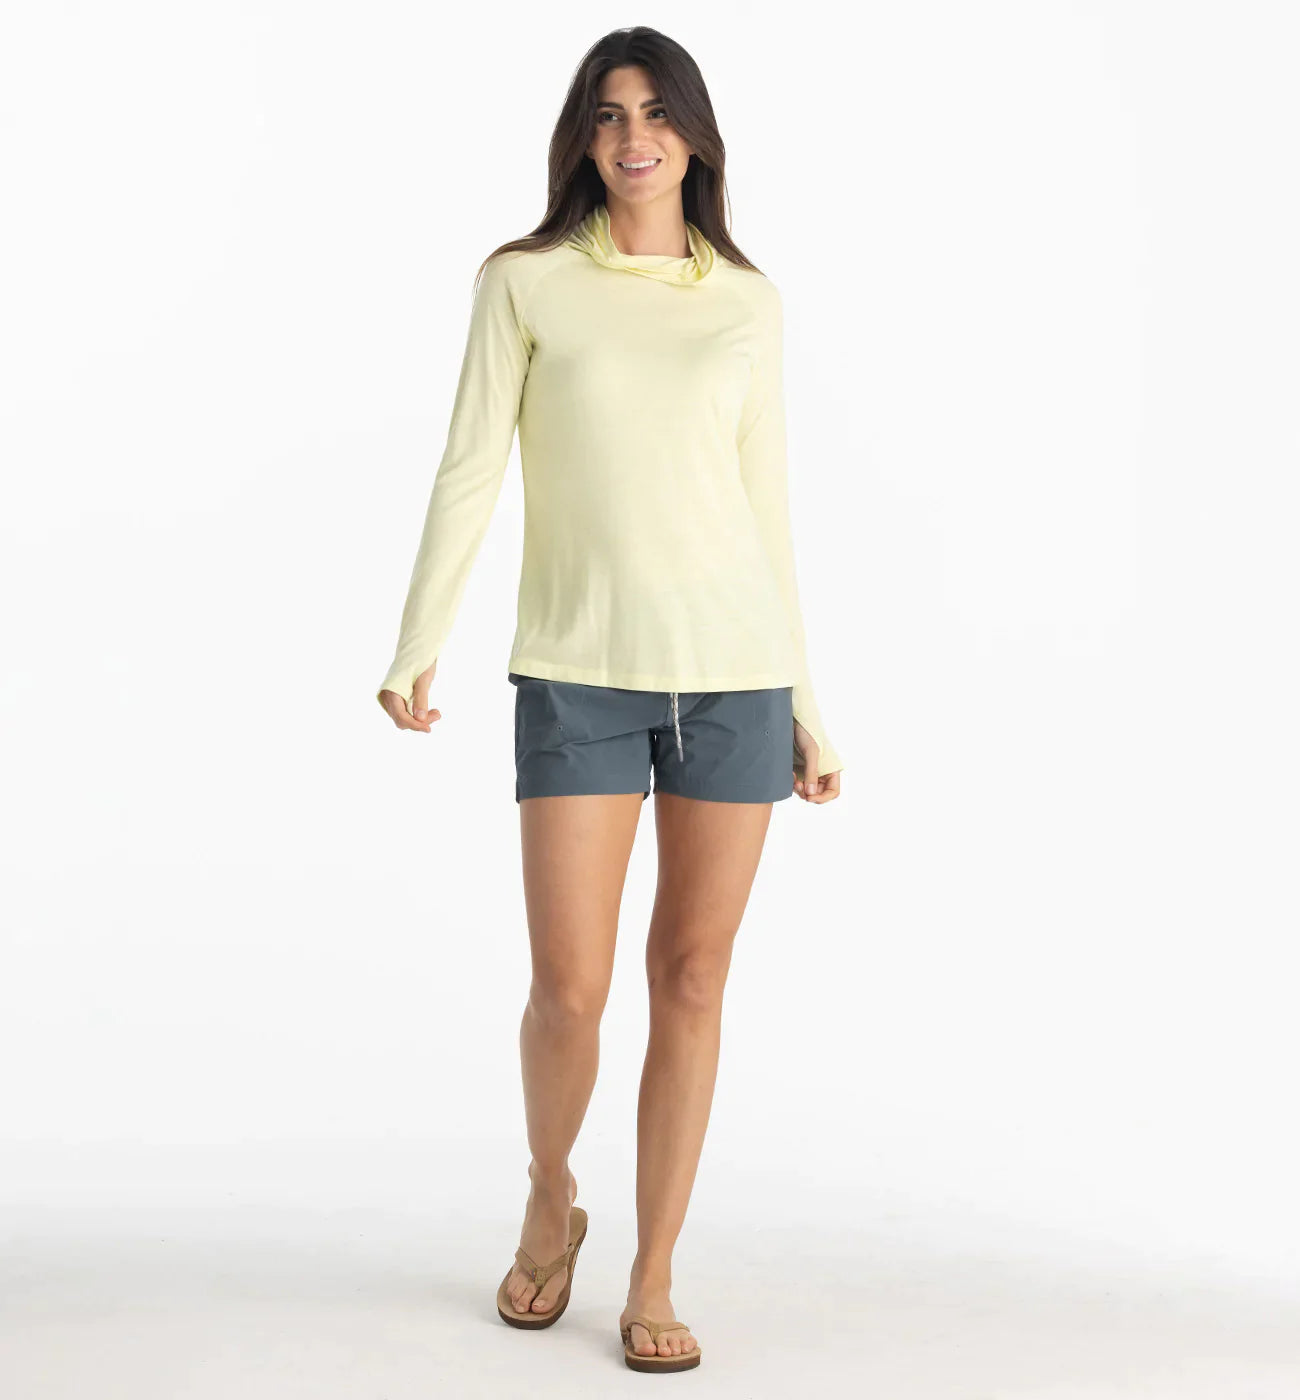 Free Fly Women's Bamboo Lightweight Hoodie II - Washed Citrus